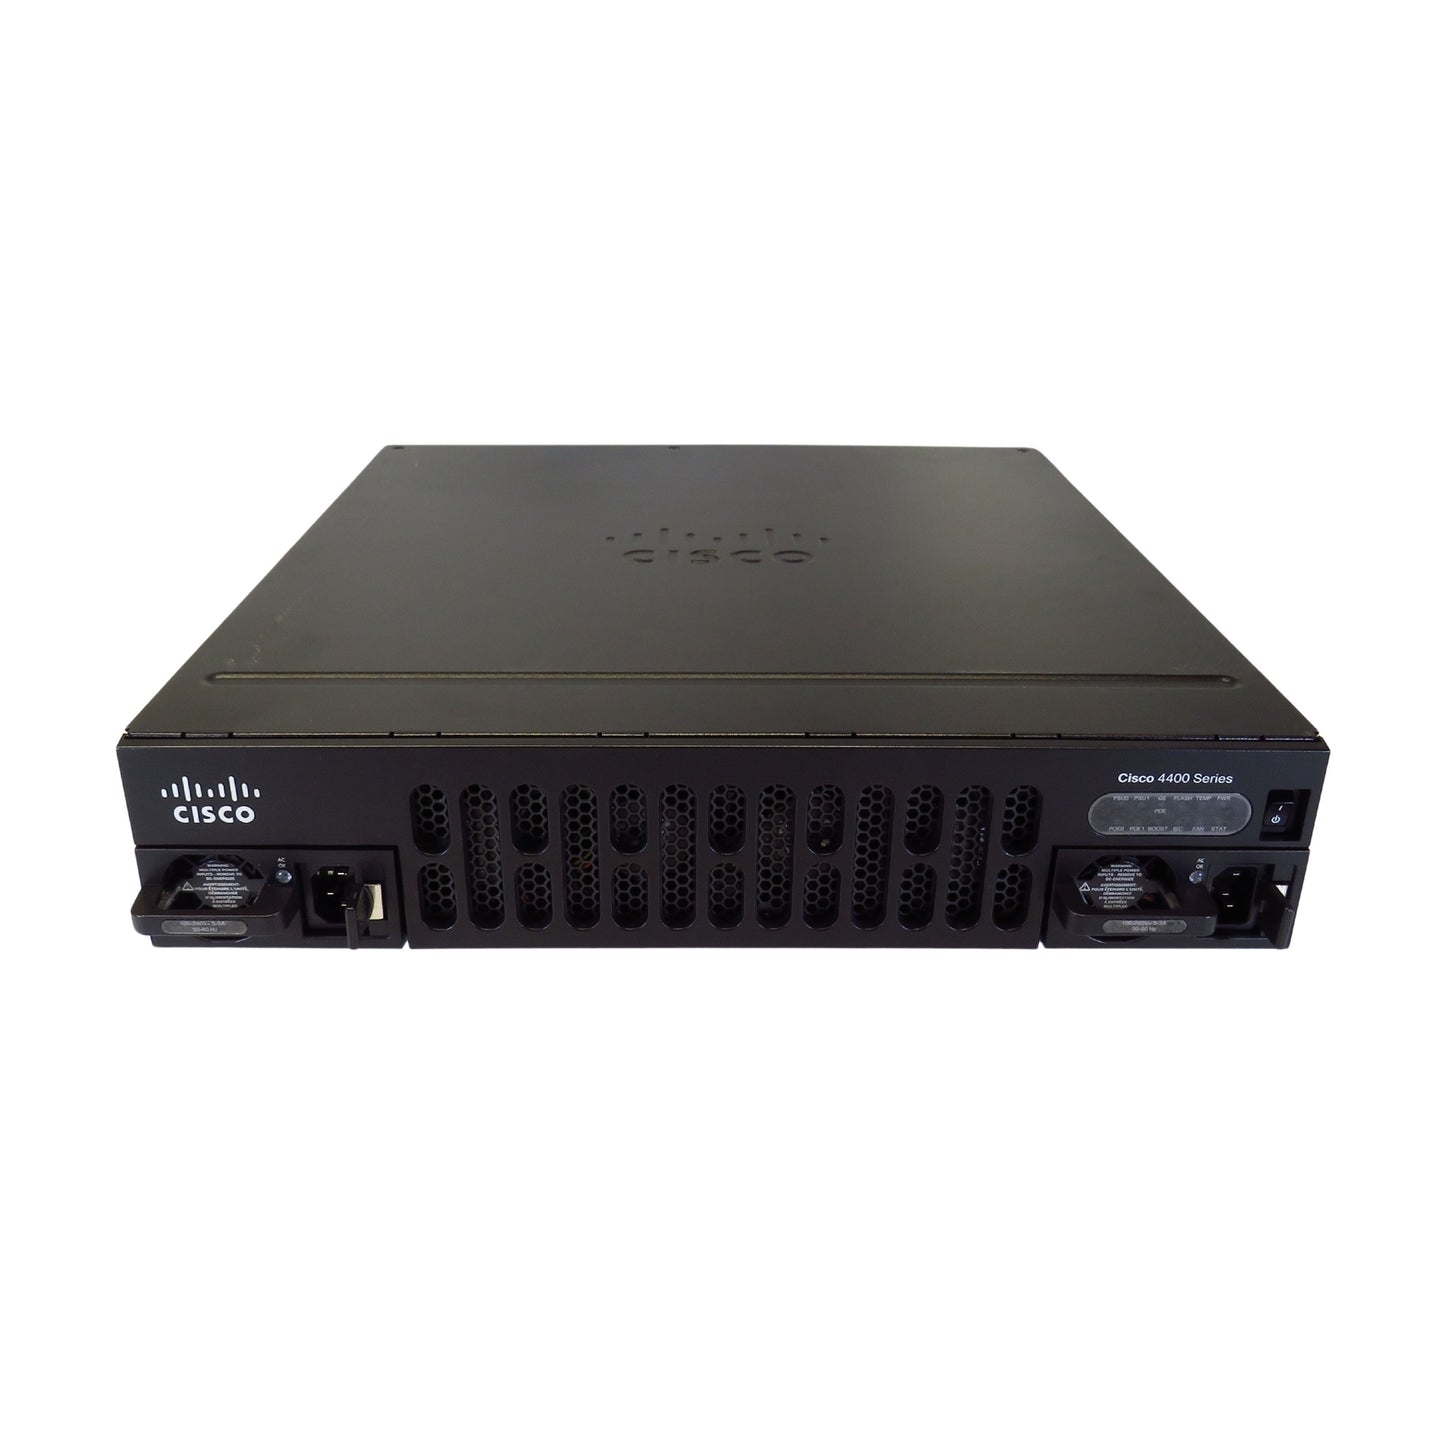 Cisco ISR4451-X/K9 ISR 4451 with 4 Onboard GE Integrated Services Router (Refurbished)